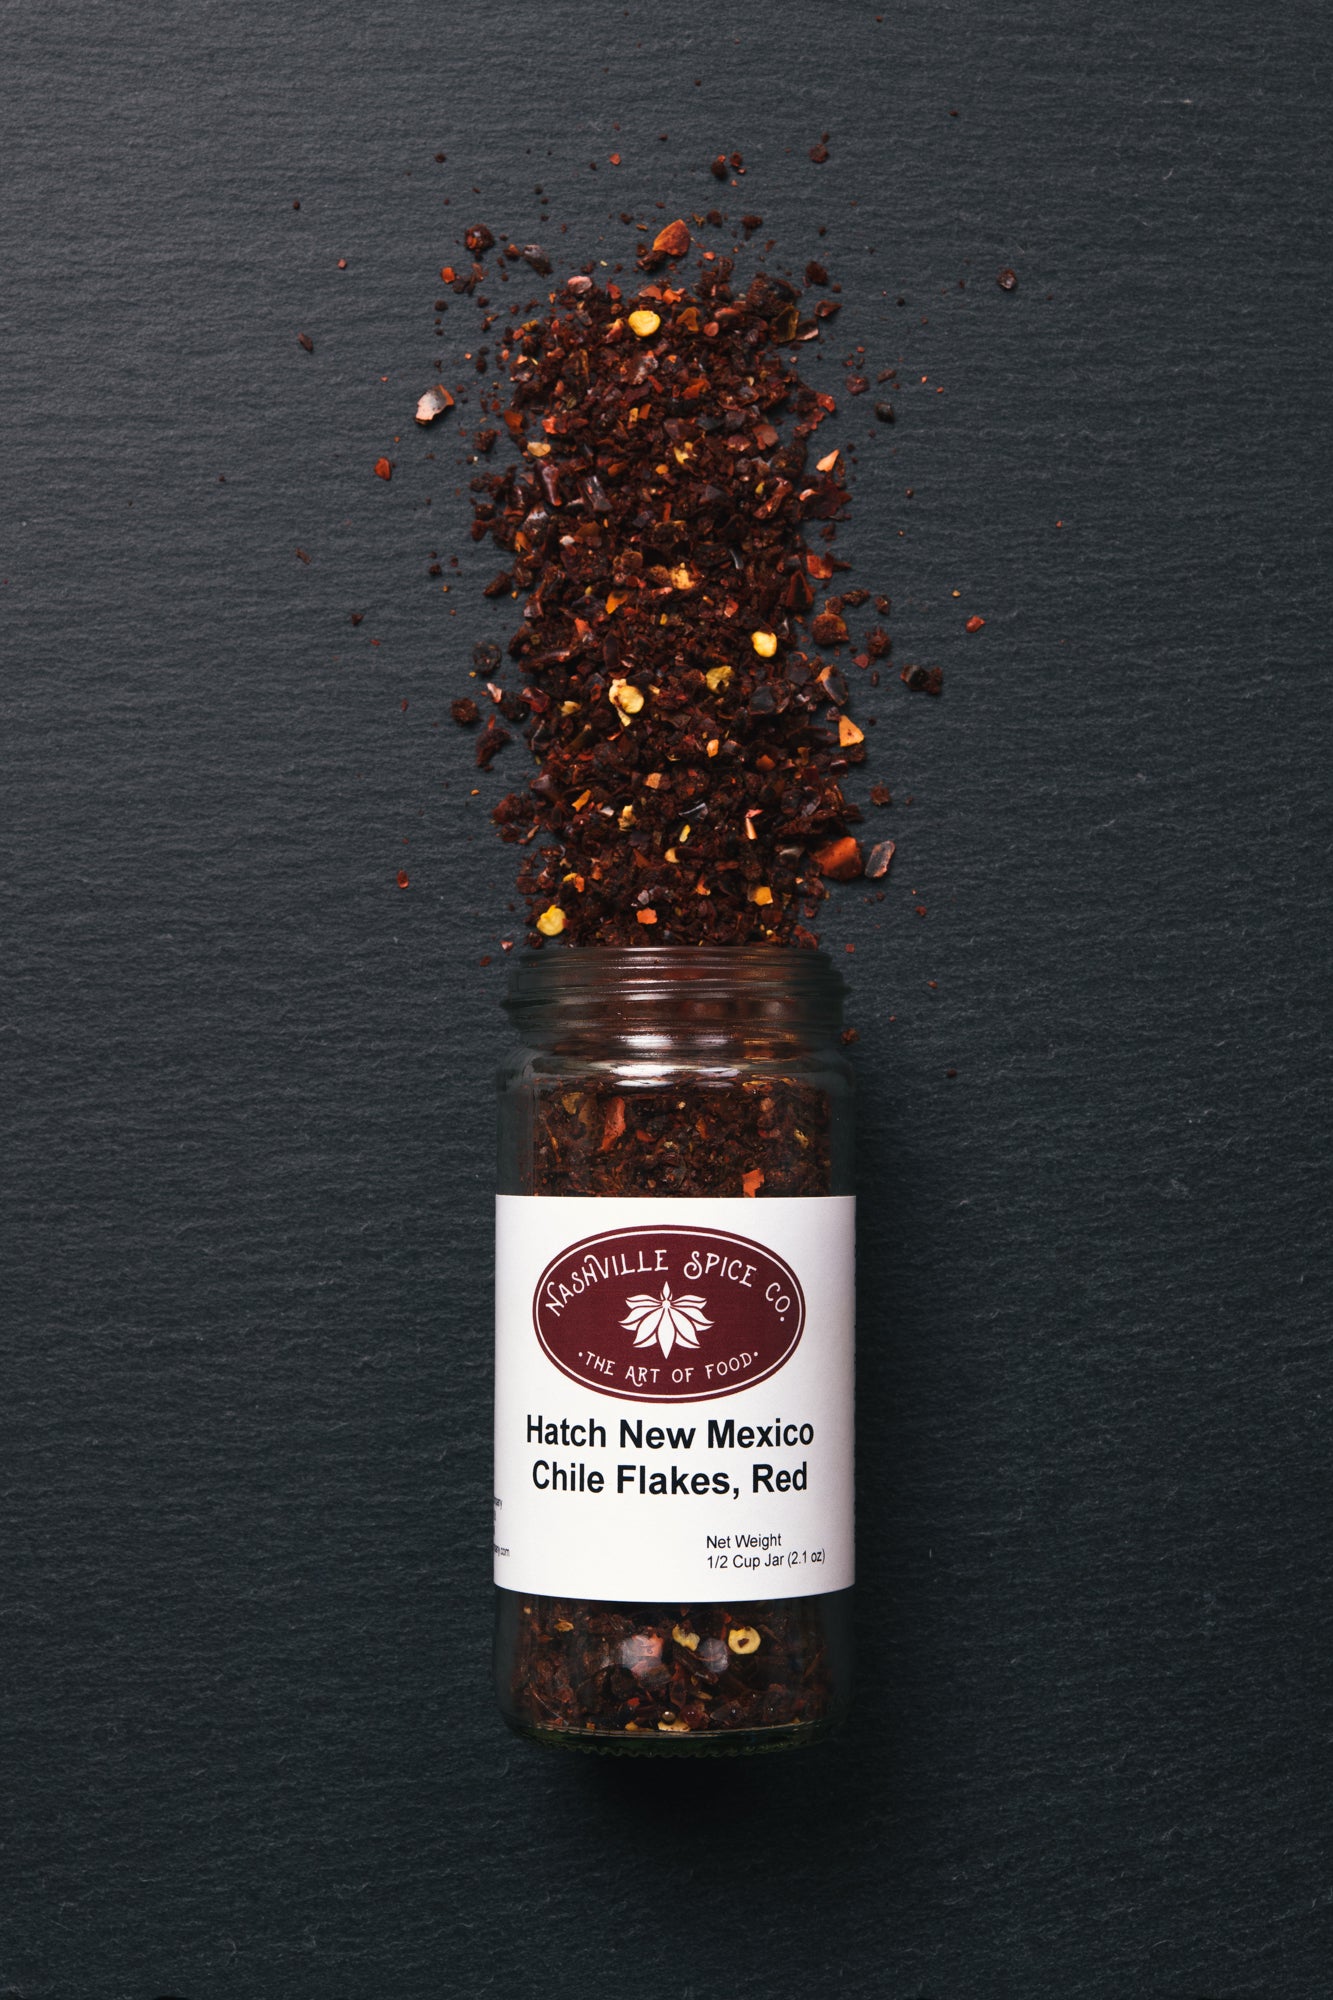 Hatch New Mexico Chile Flakes, Red